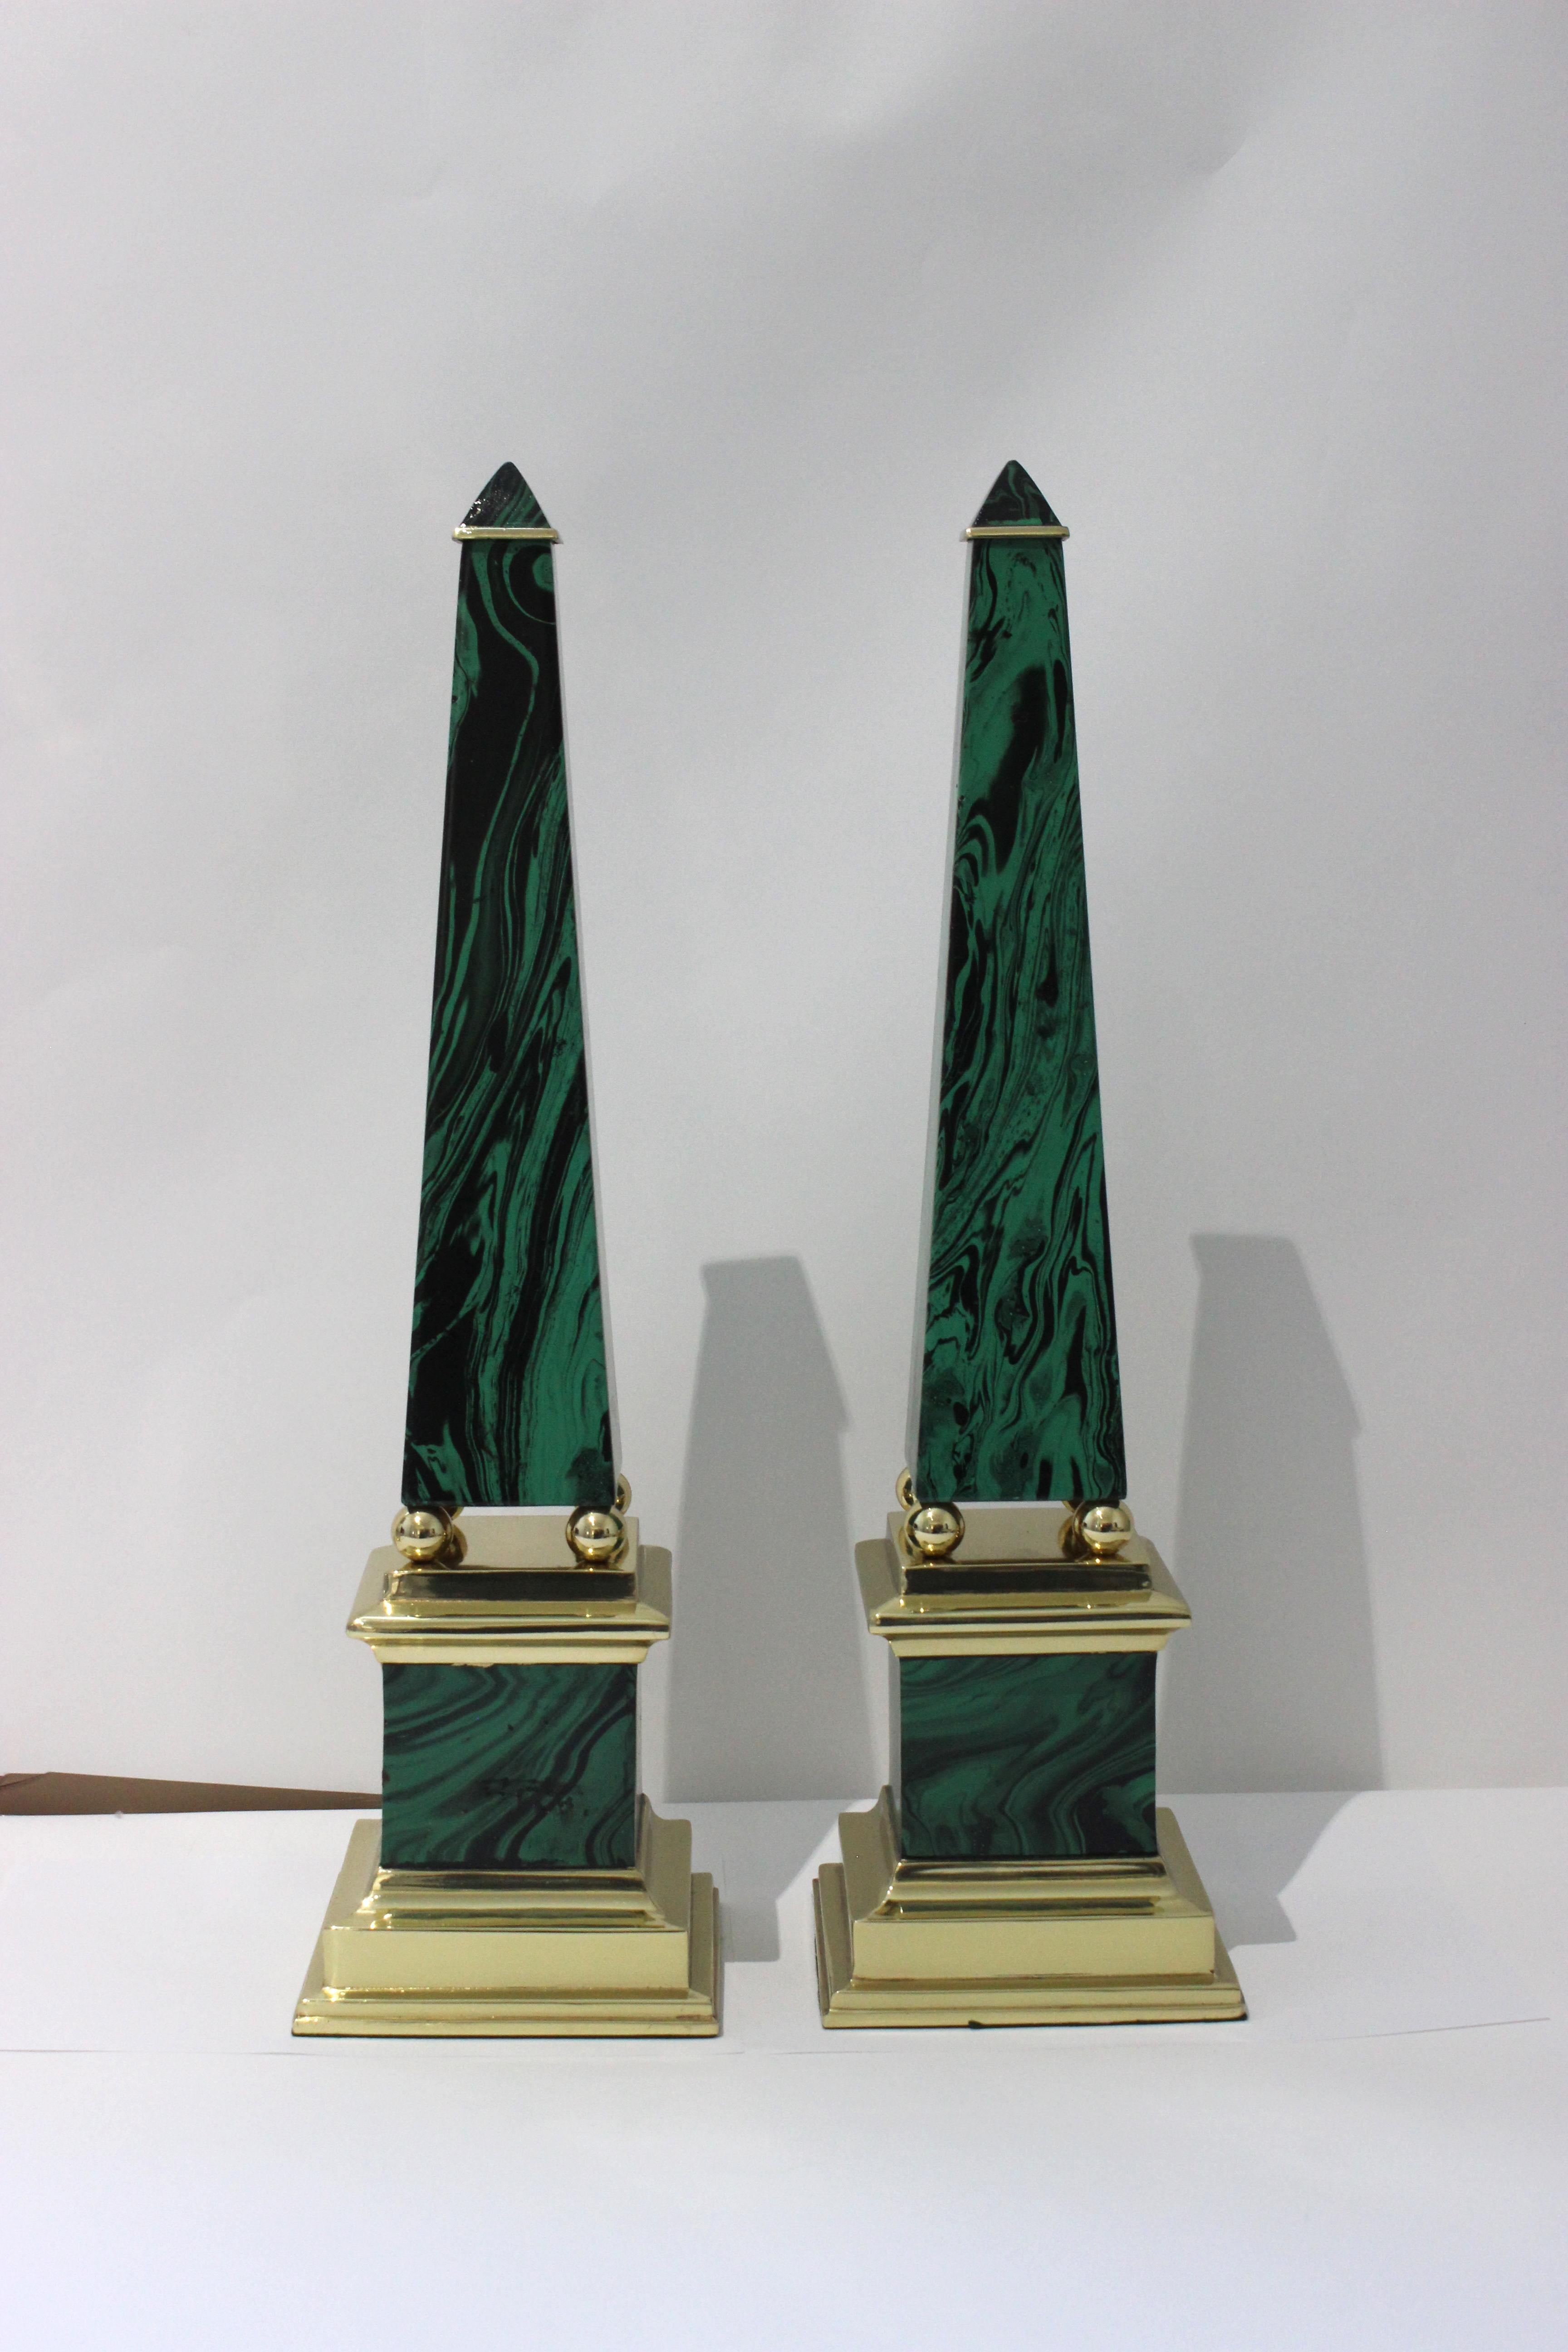 Pair of Egyptian Revival Oblelisks by Chapman In Good Condition For Sale In West Palm Beach, FL